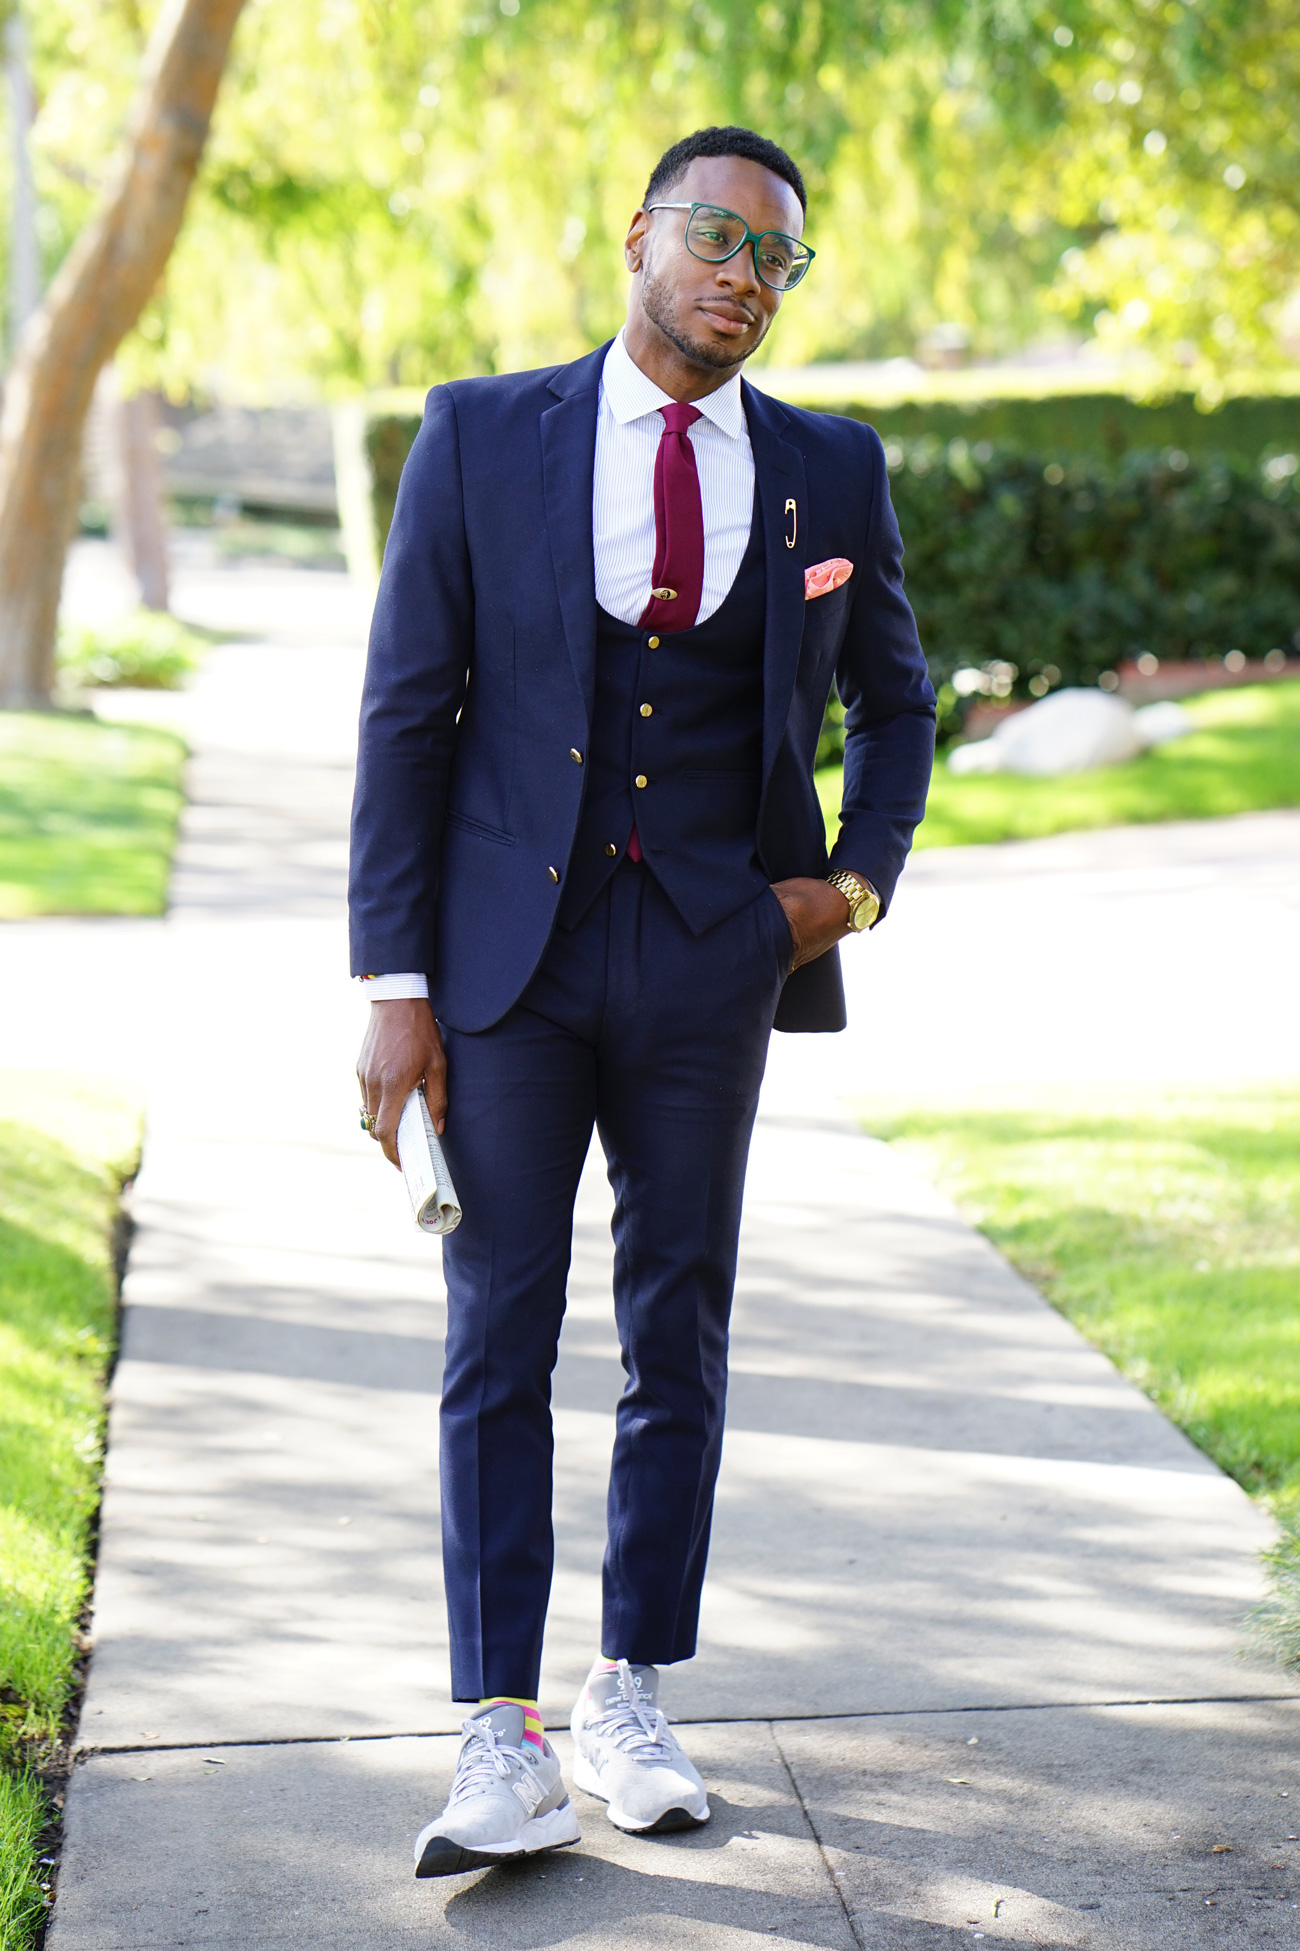 BUSINESS SUIT STYLED WITH NEW BALANCE 